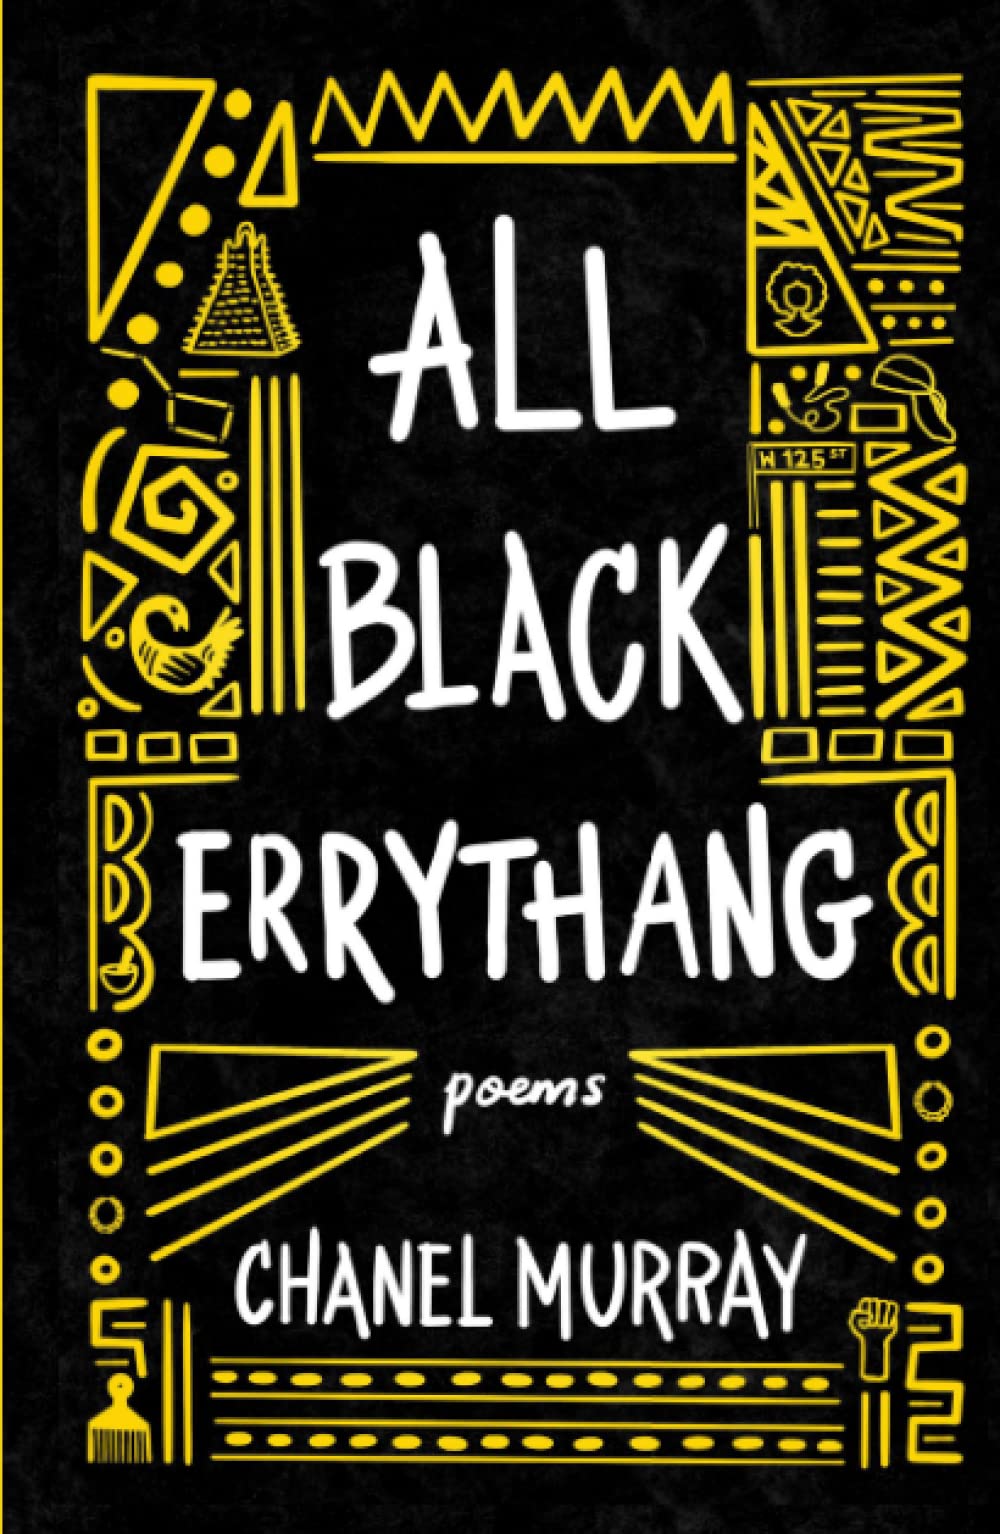 All Black Errythang: Poems